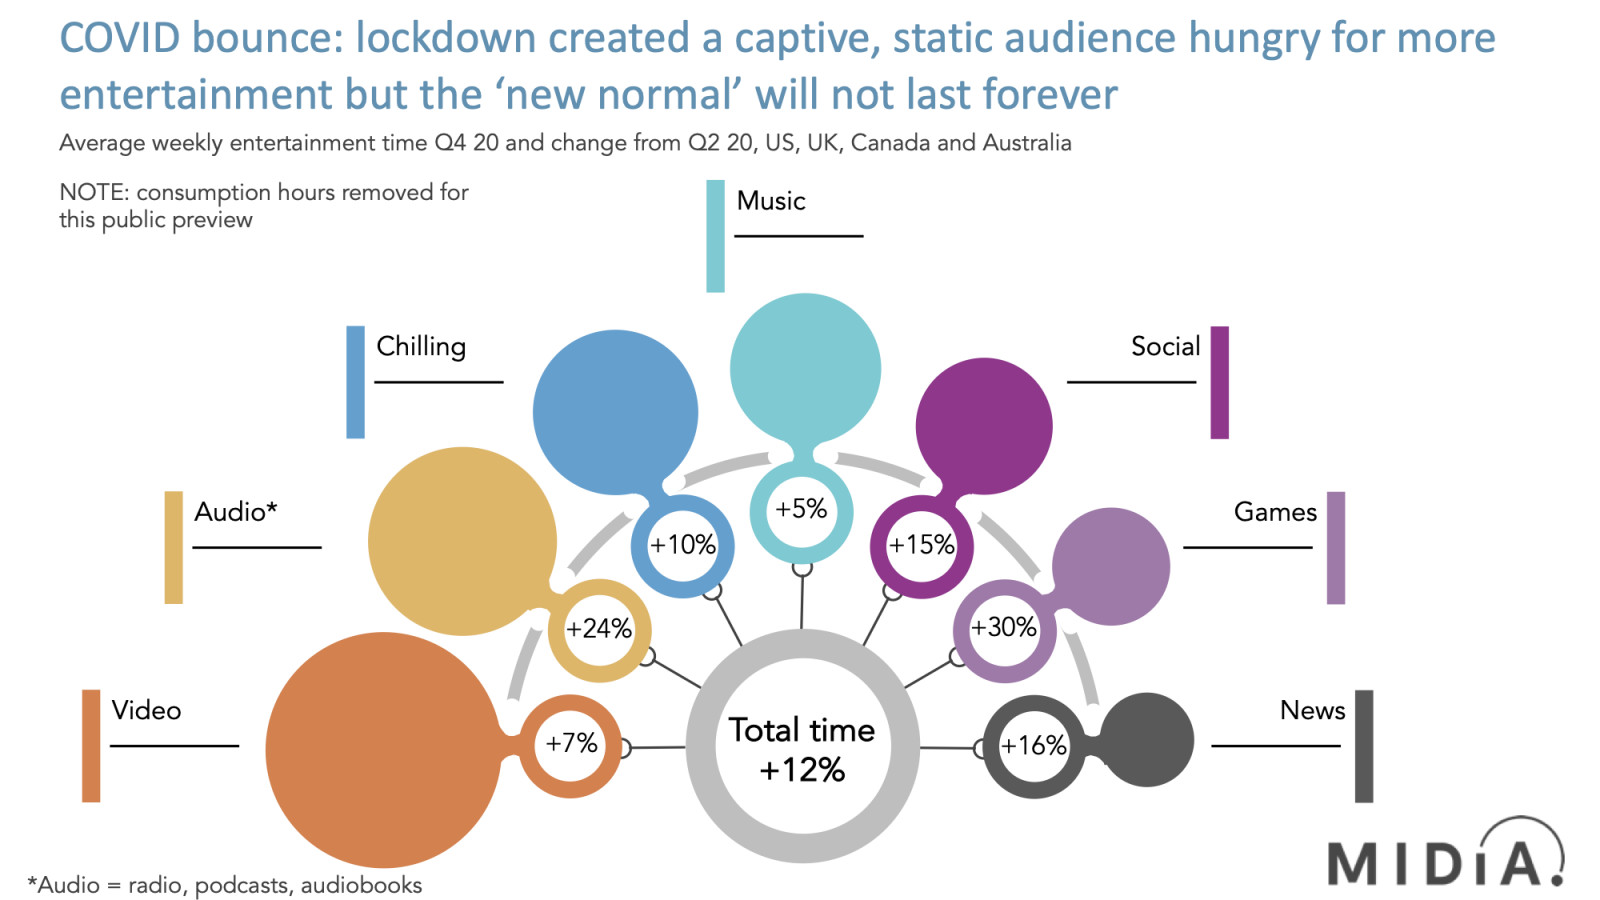 People listened more than ever in lockdown, but something grew more than music